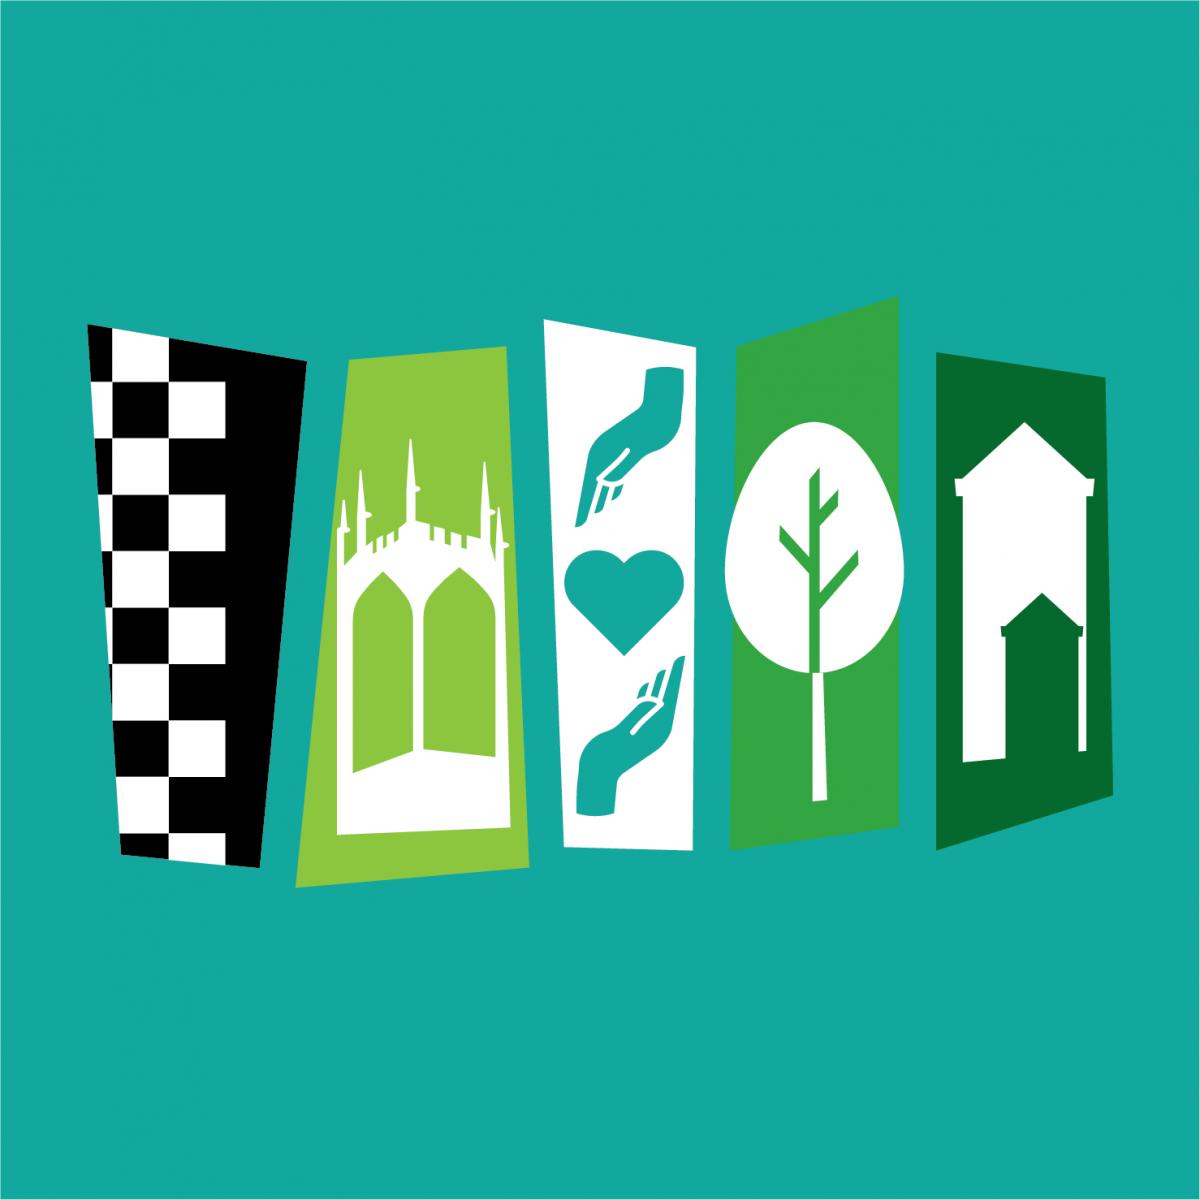 green graphic of four different sections, one black and white checkboard, one church, one two hands holding heart, one leaf, and last buildings